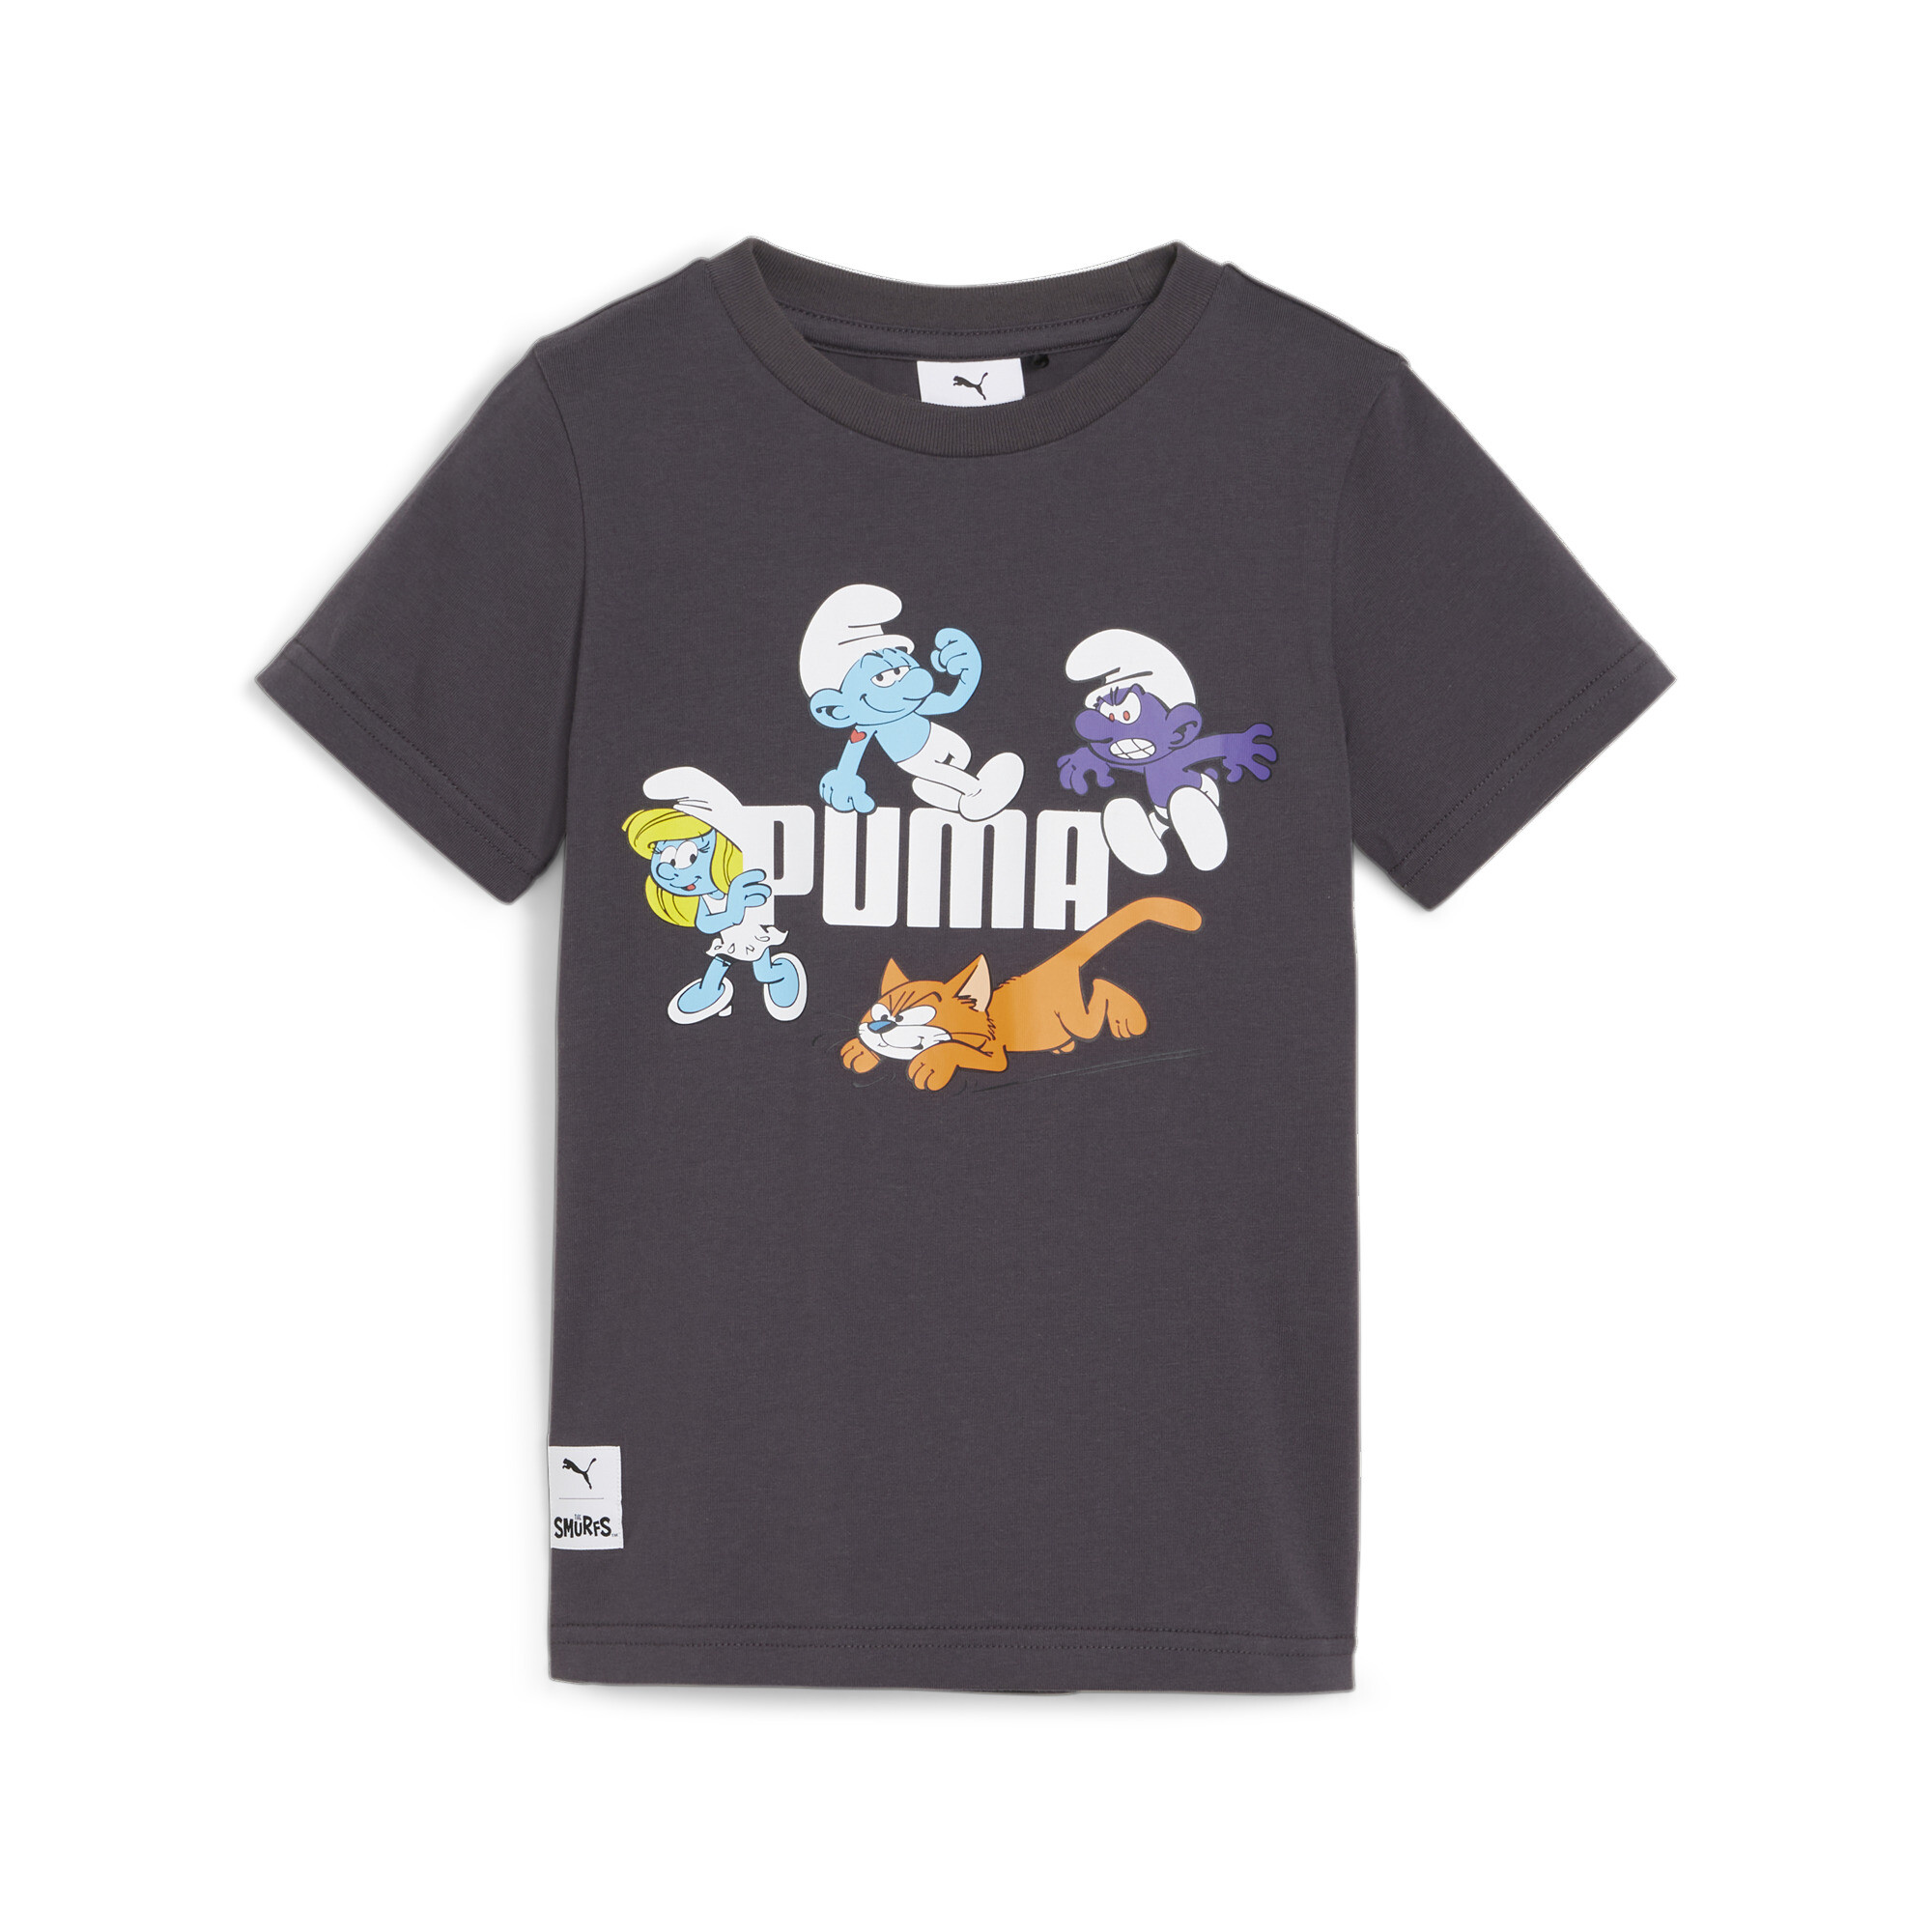 PUMA X THE SMURFS T-Shirt In Gray, Size 1-2 Youth